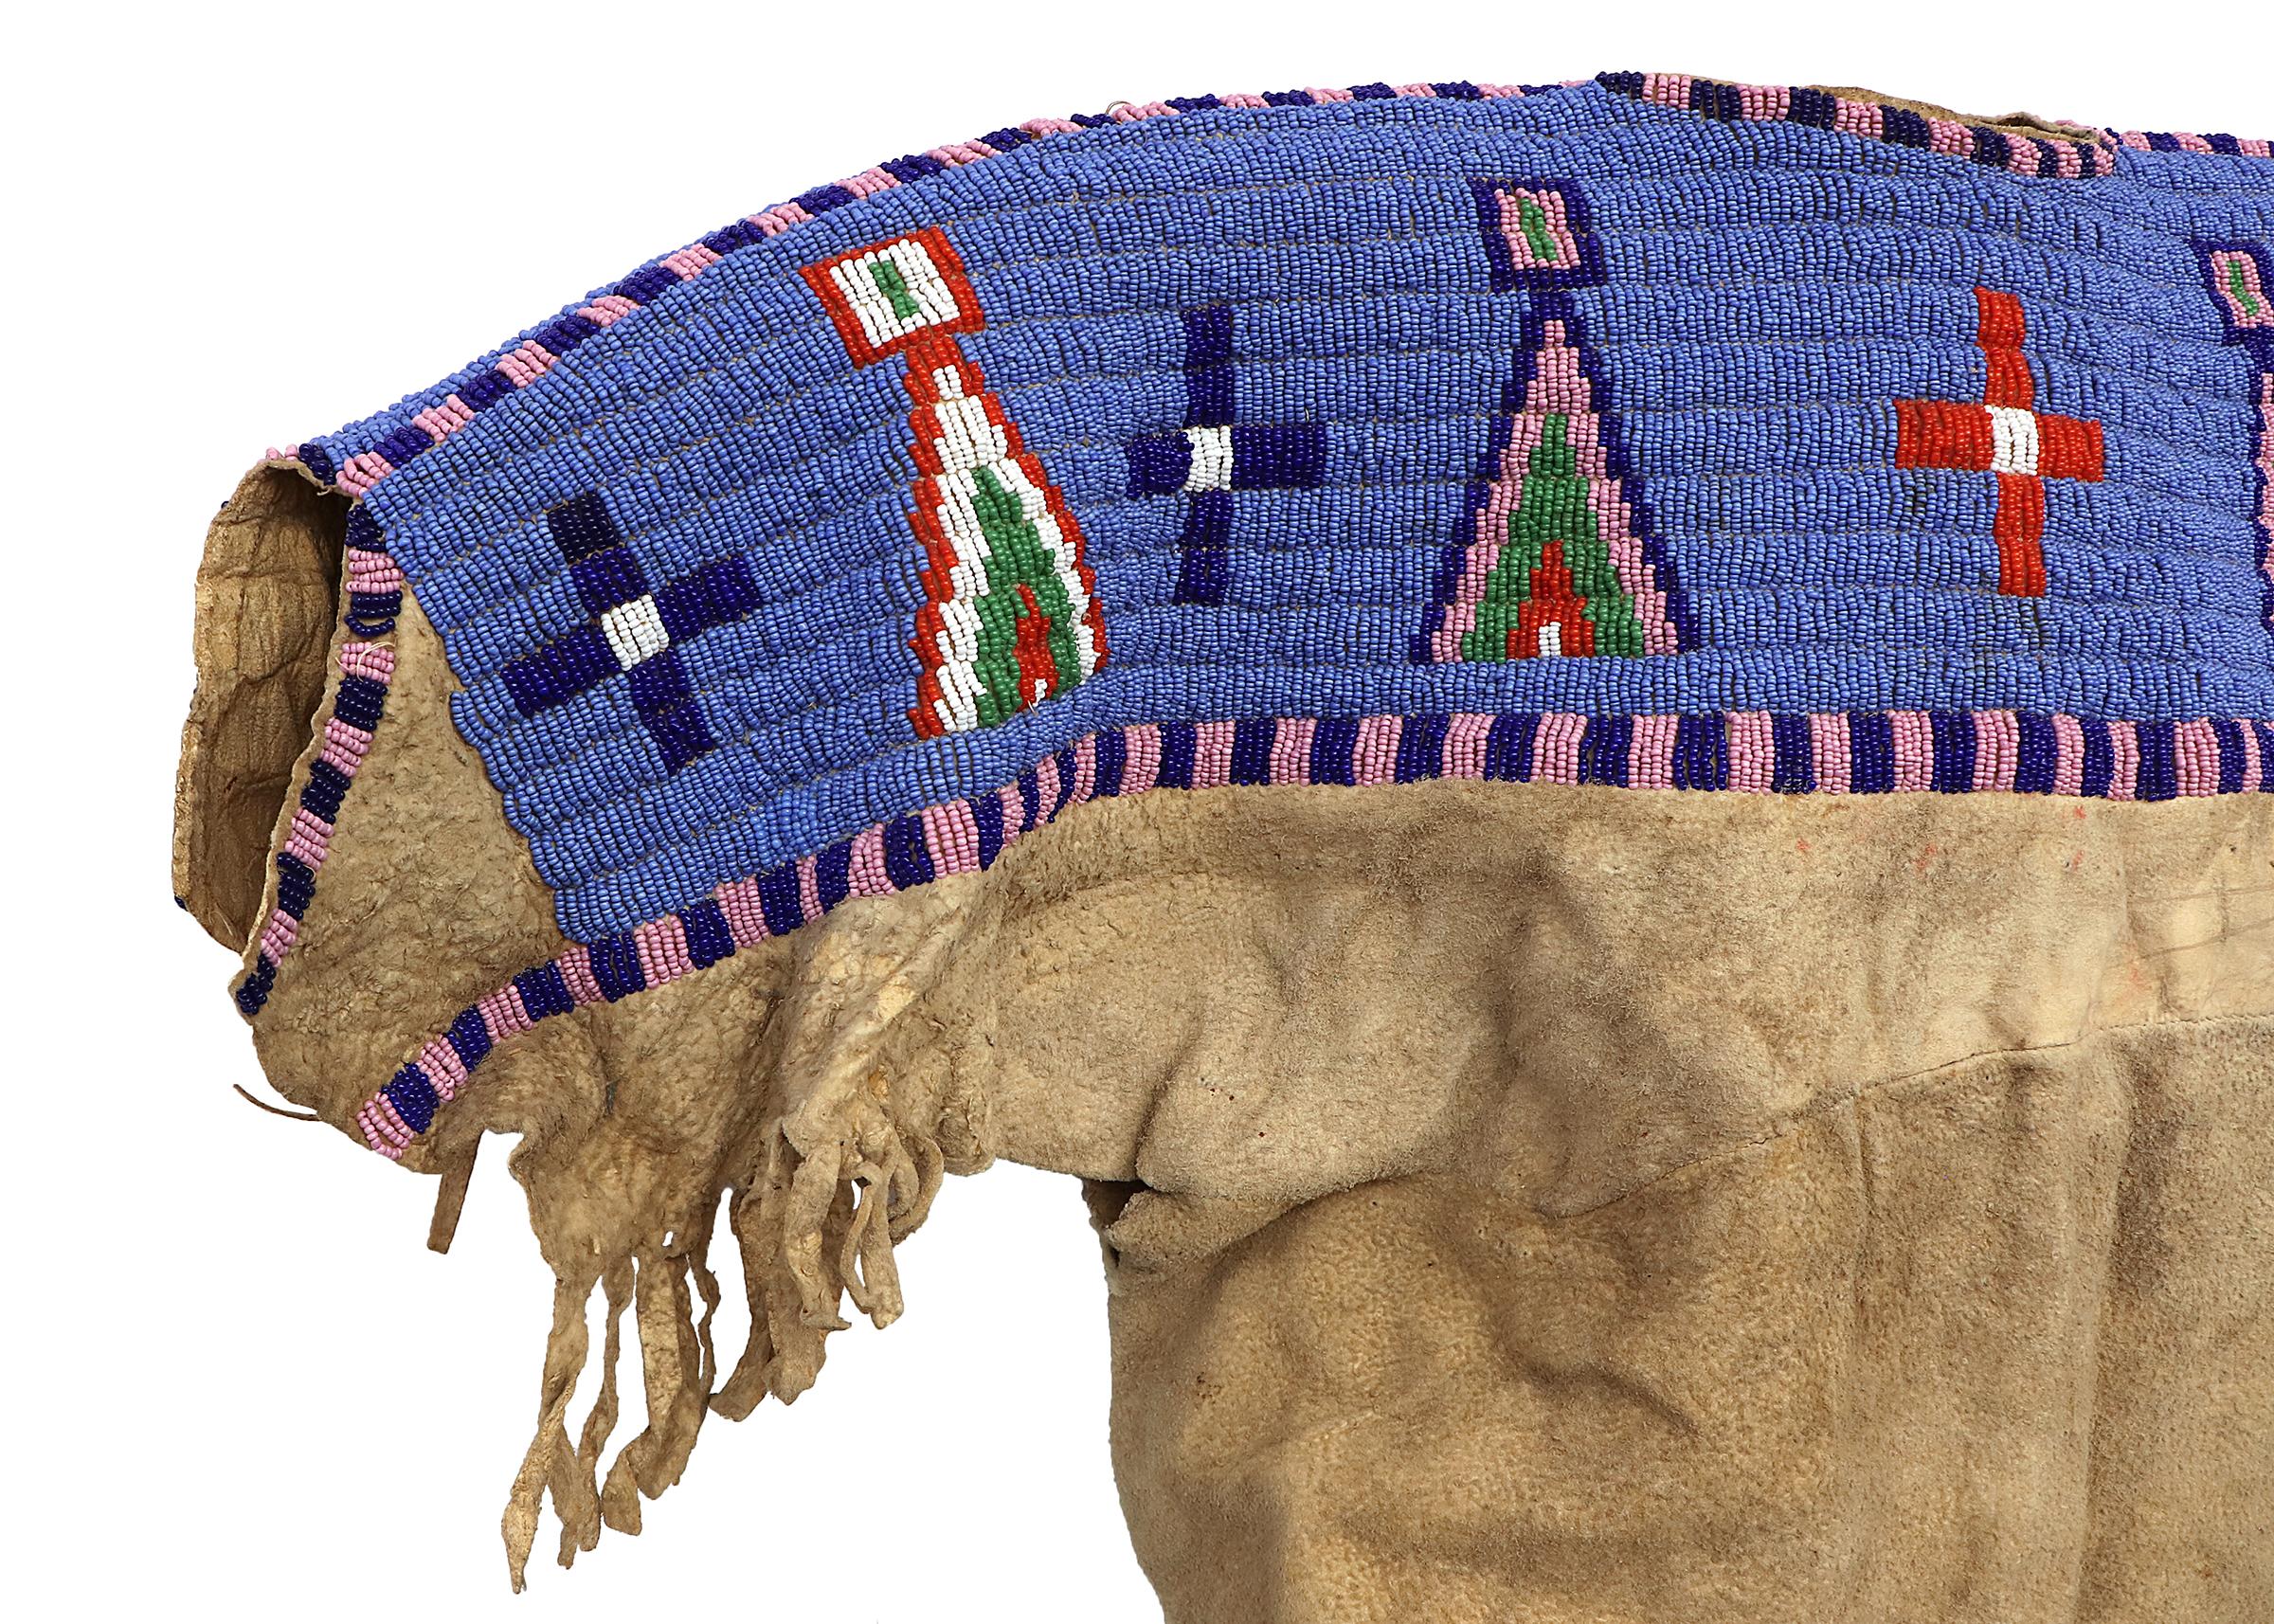 Native American Antique Beaded Child's Dress & Leggings, Sioux (Plains Indian) circa 1900, blue For Sale